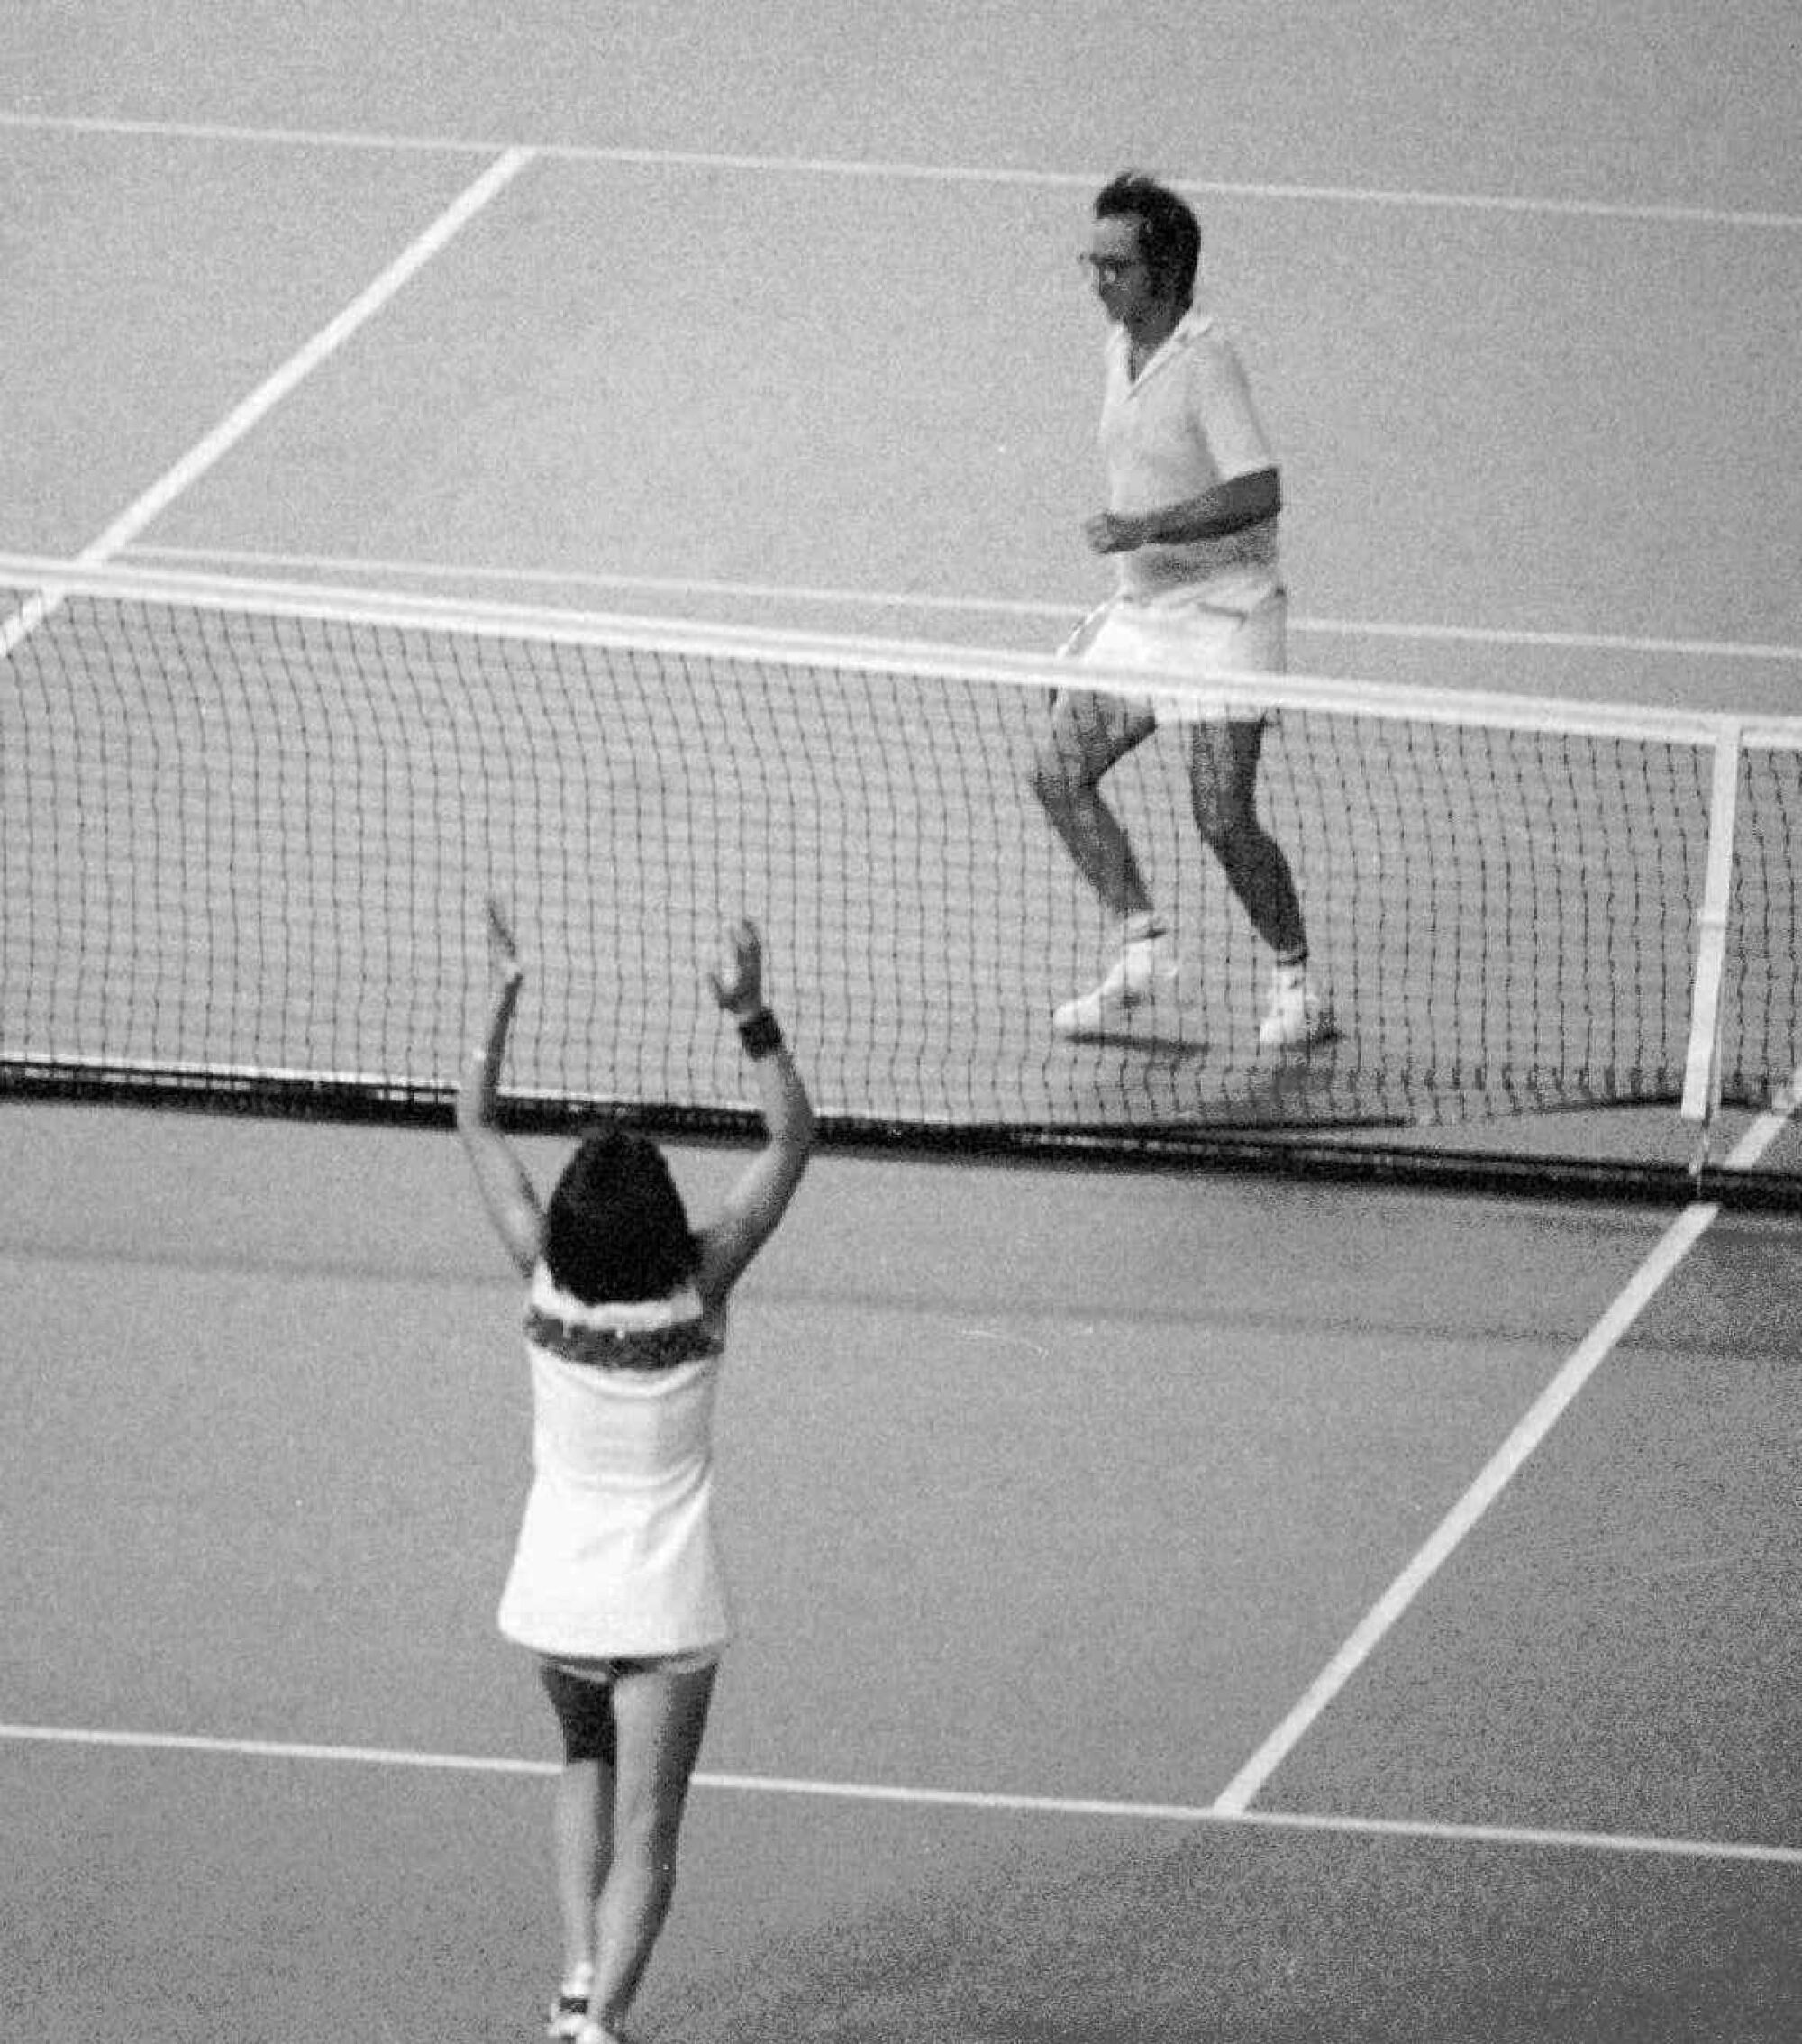 Billie Jean King defeats Bobby Riggs at the Houston Astrodome on Sept. 20, 1973.